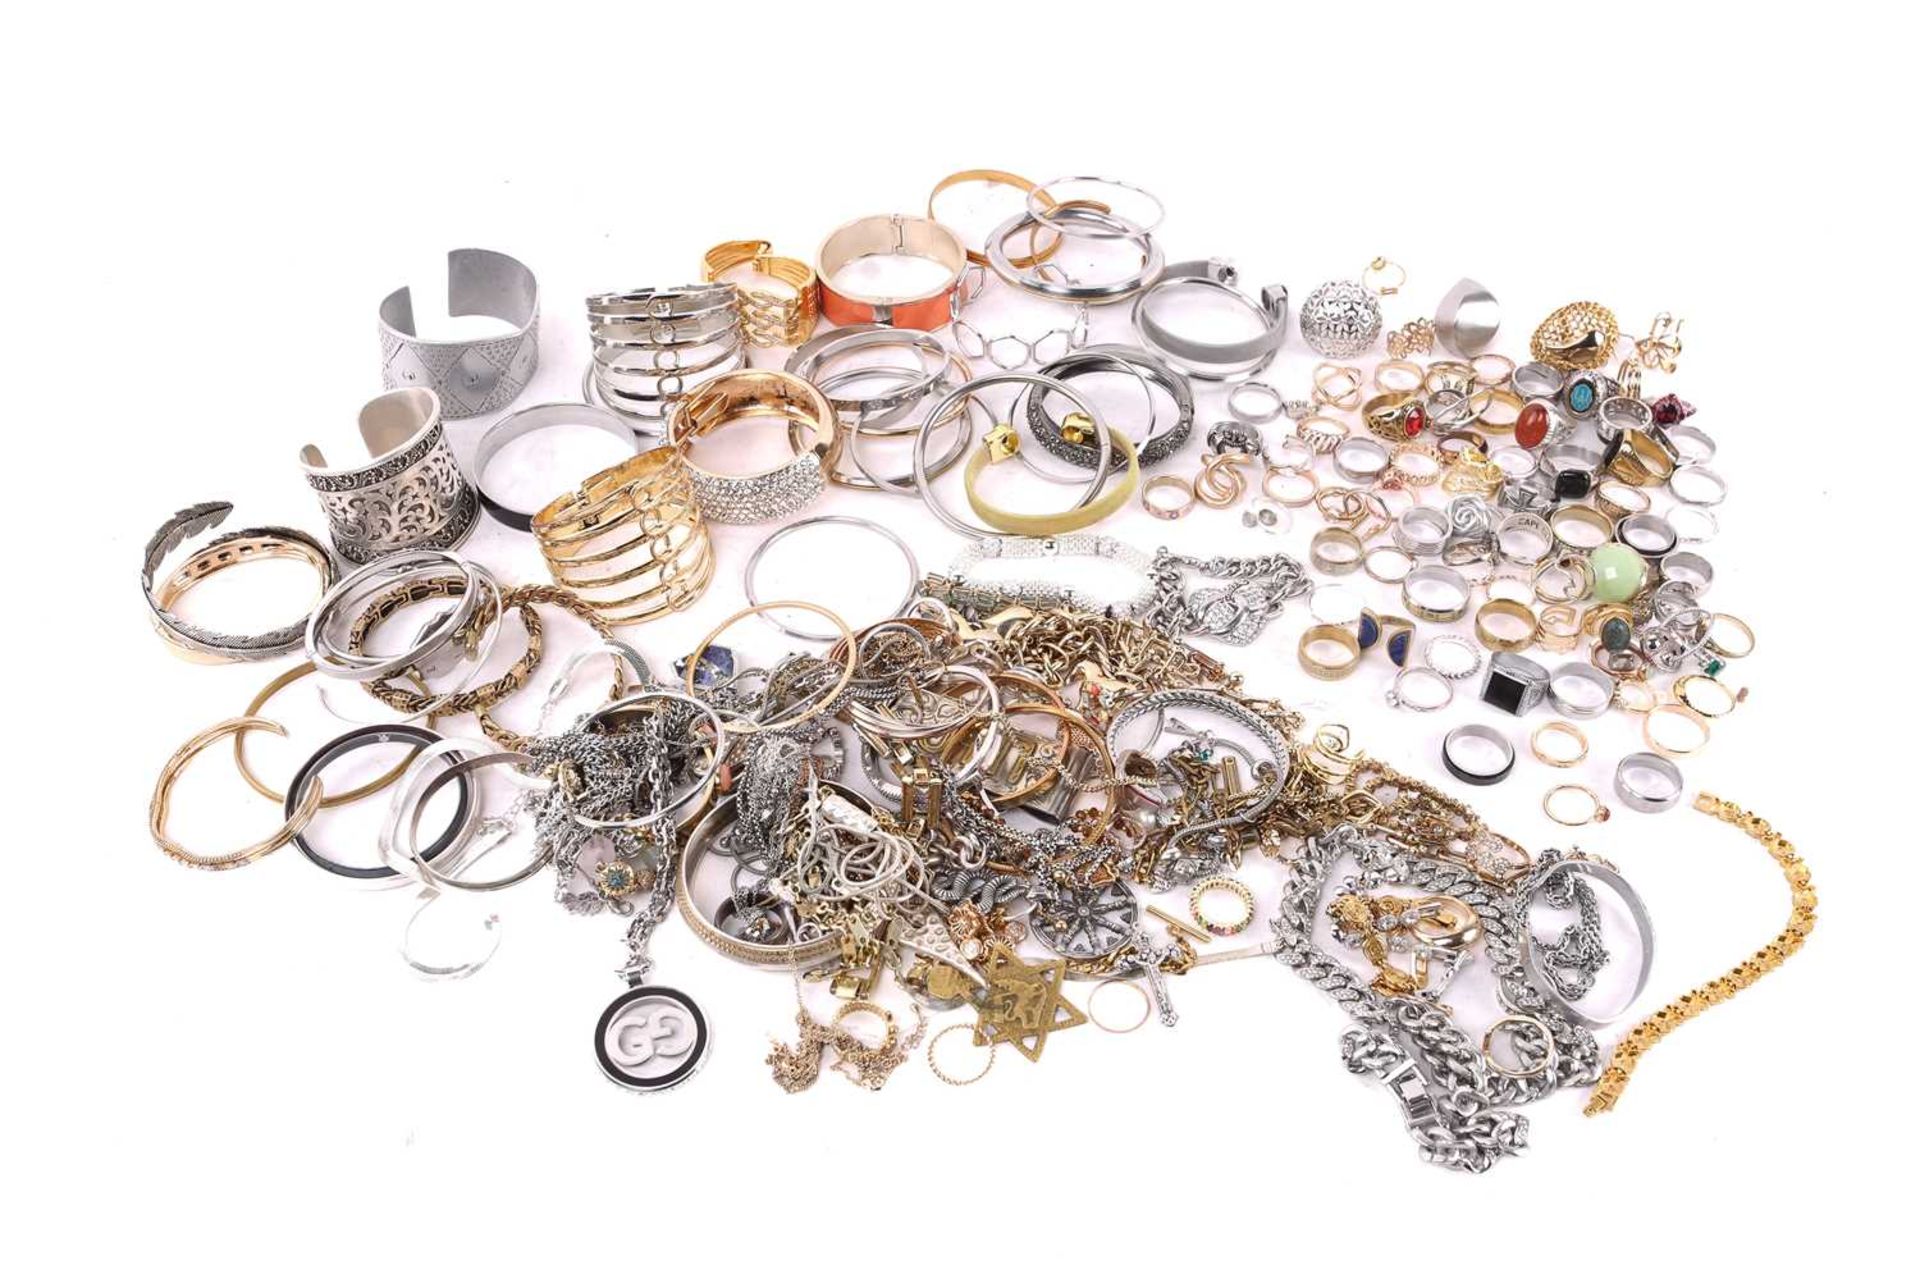 A quantity of costume jewellery including cuff bangles, necklaces and rings. Total weight 2,718